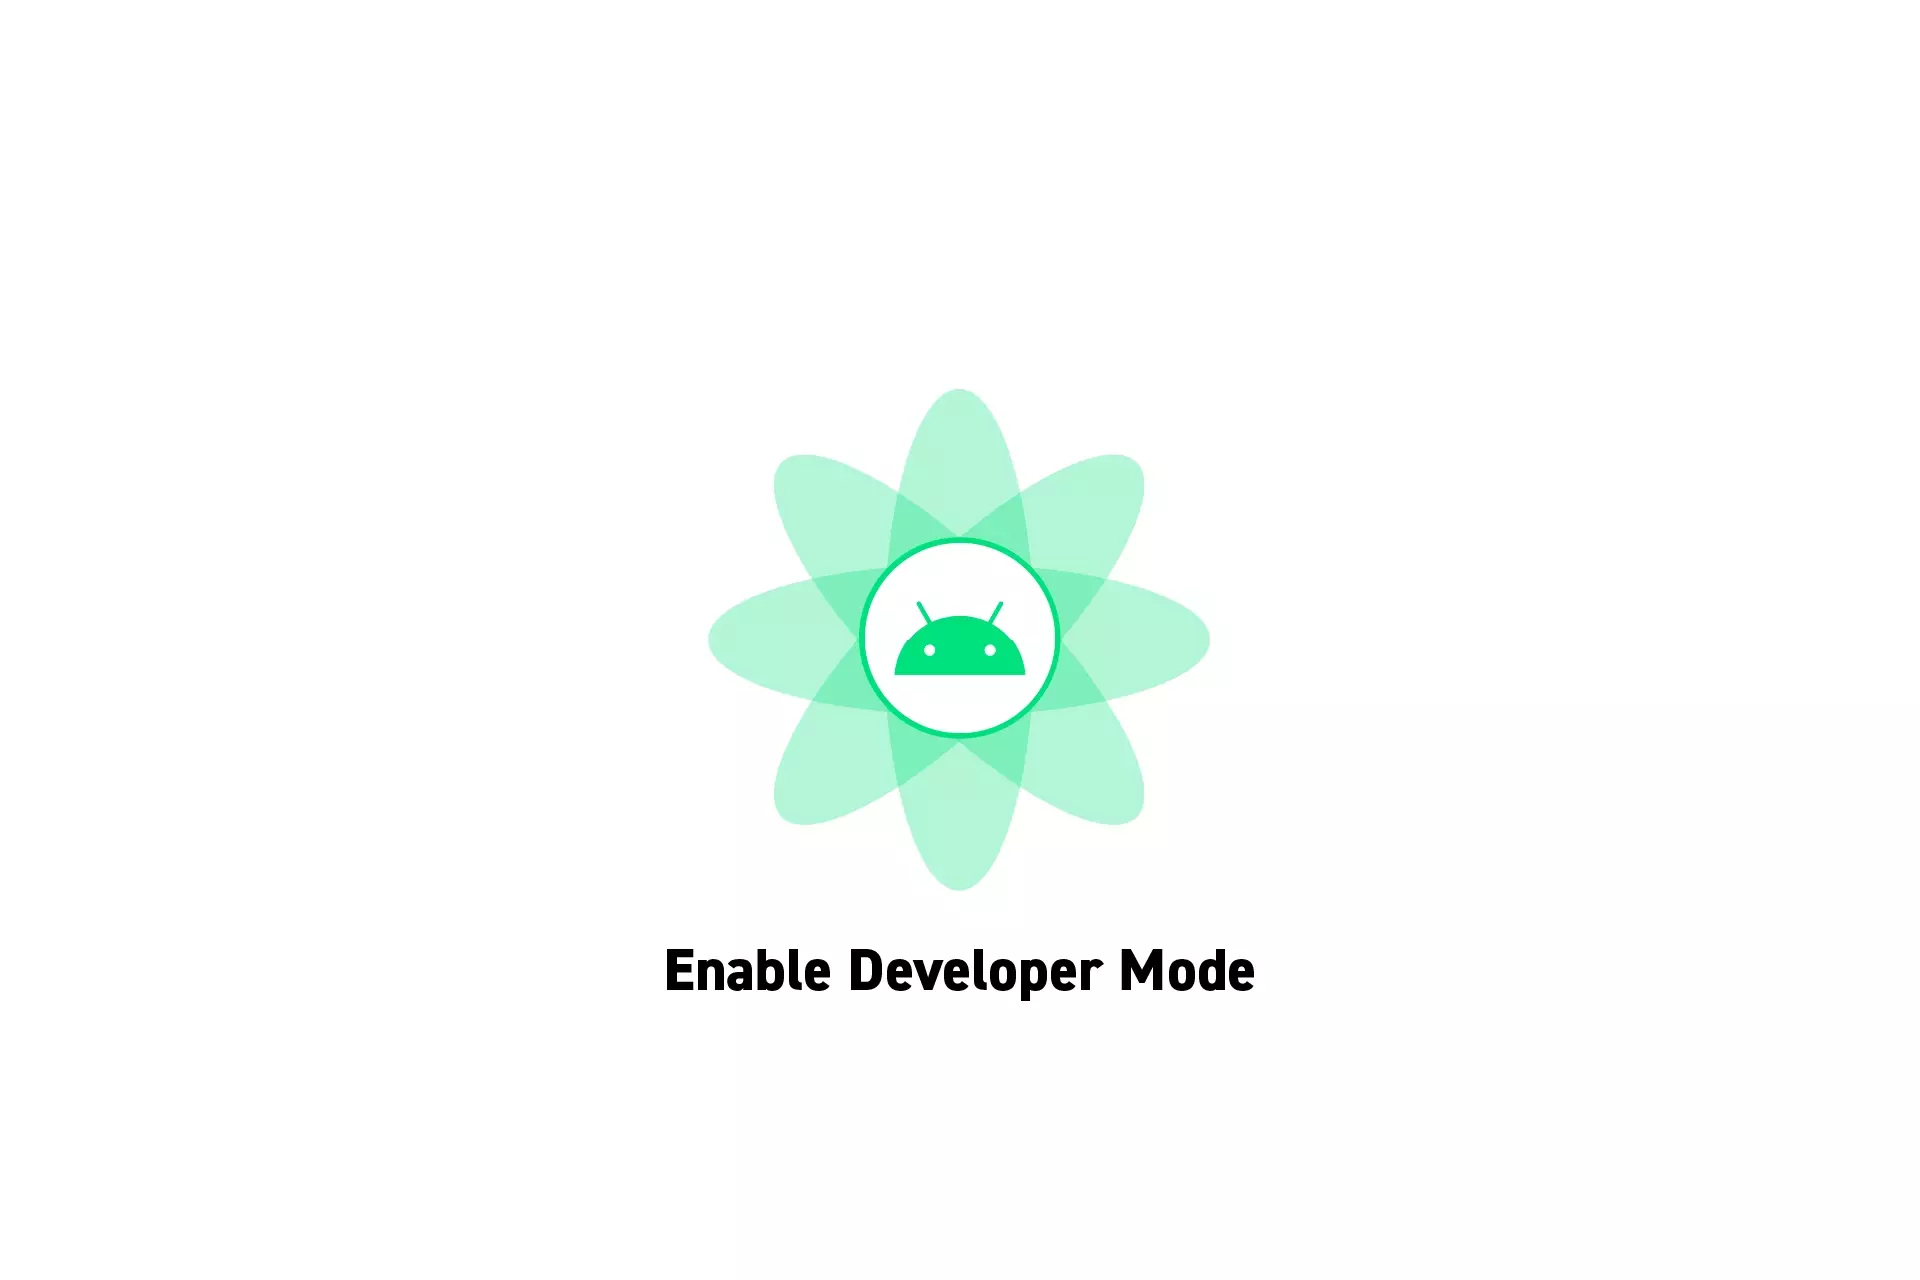 A flower that represents Android with the text "Enable Developer Mode" beneath it.